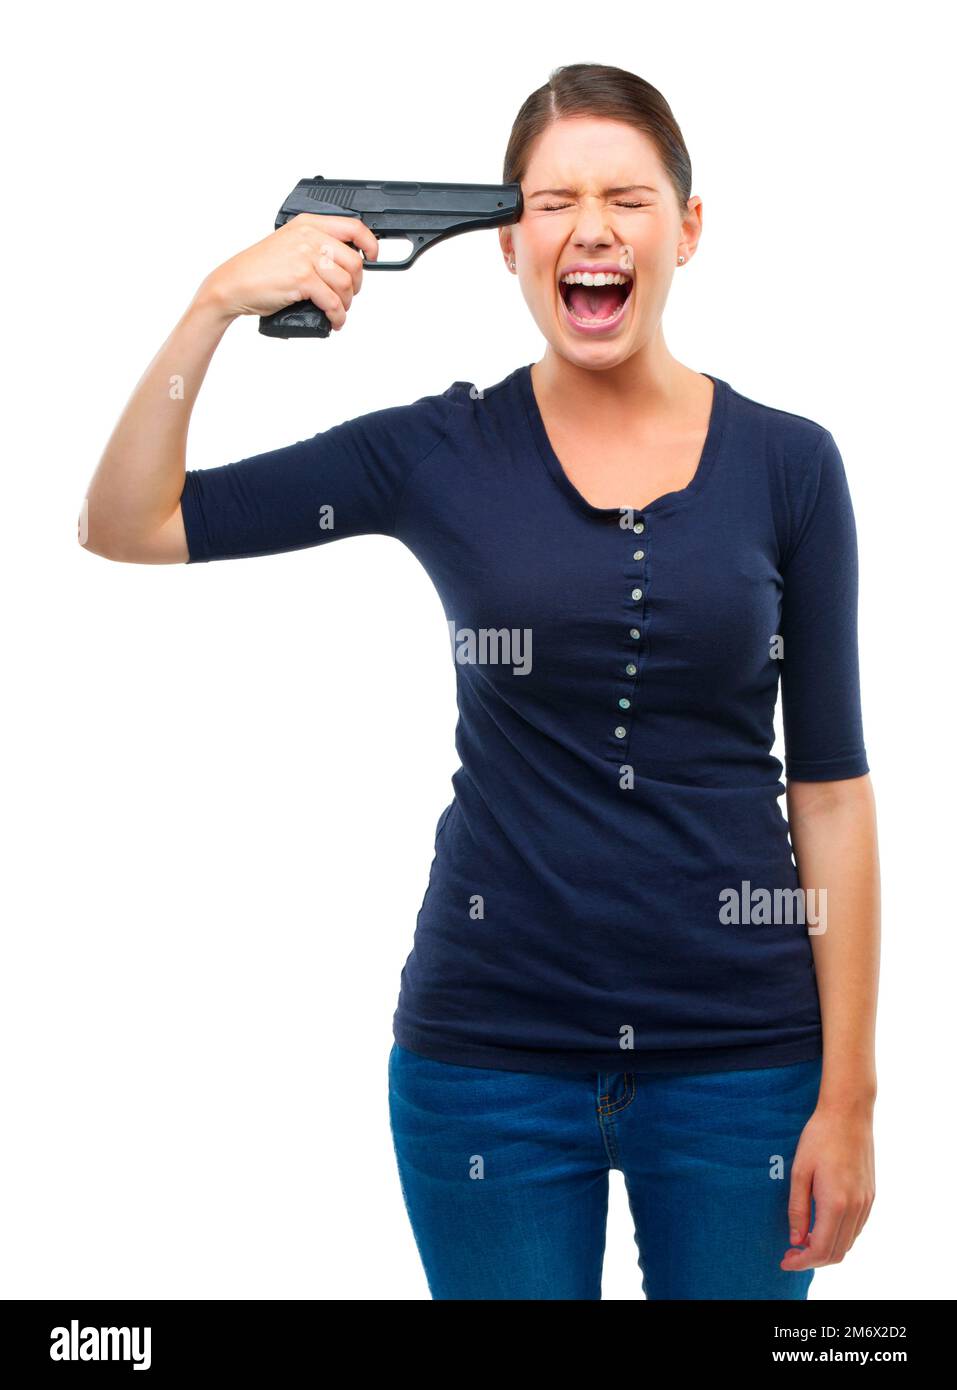 Control your anger before it leads to danger. Studio shot of a young woman pointing a gun at her head isolated on white. Stock Photo